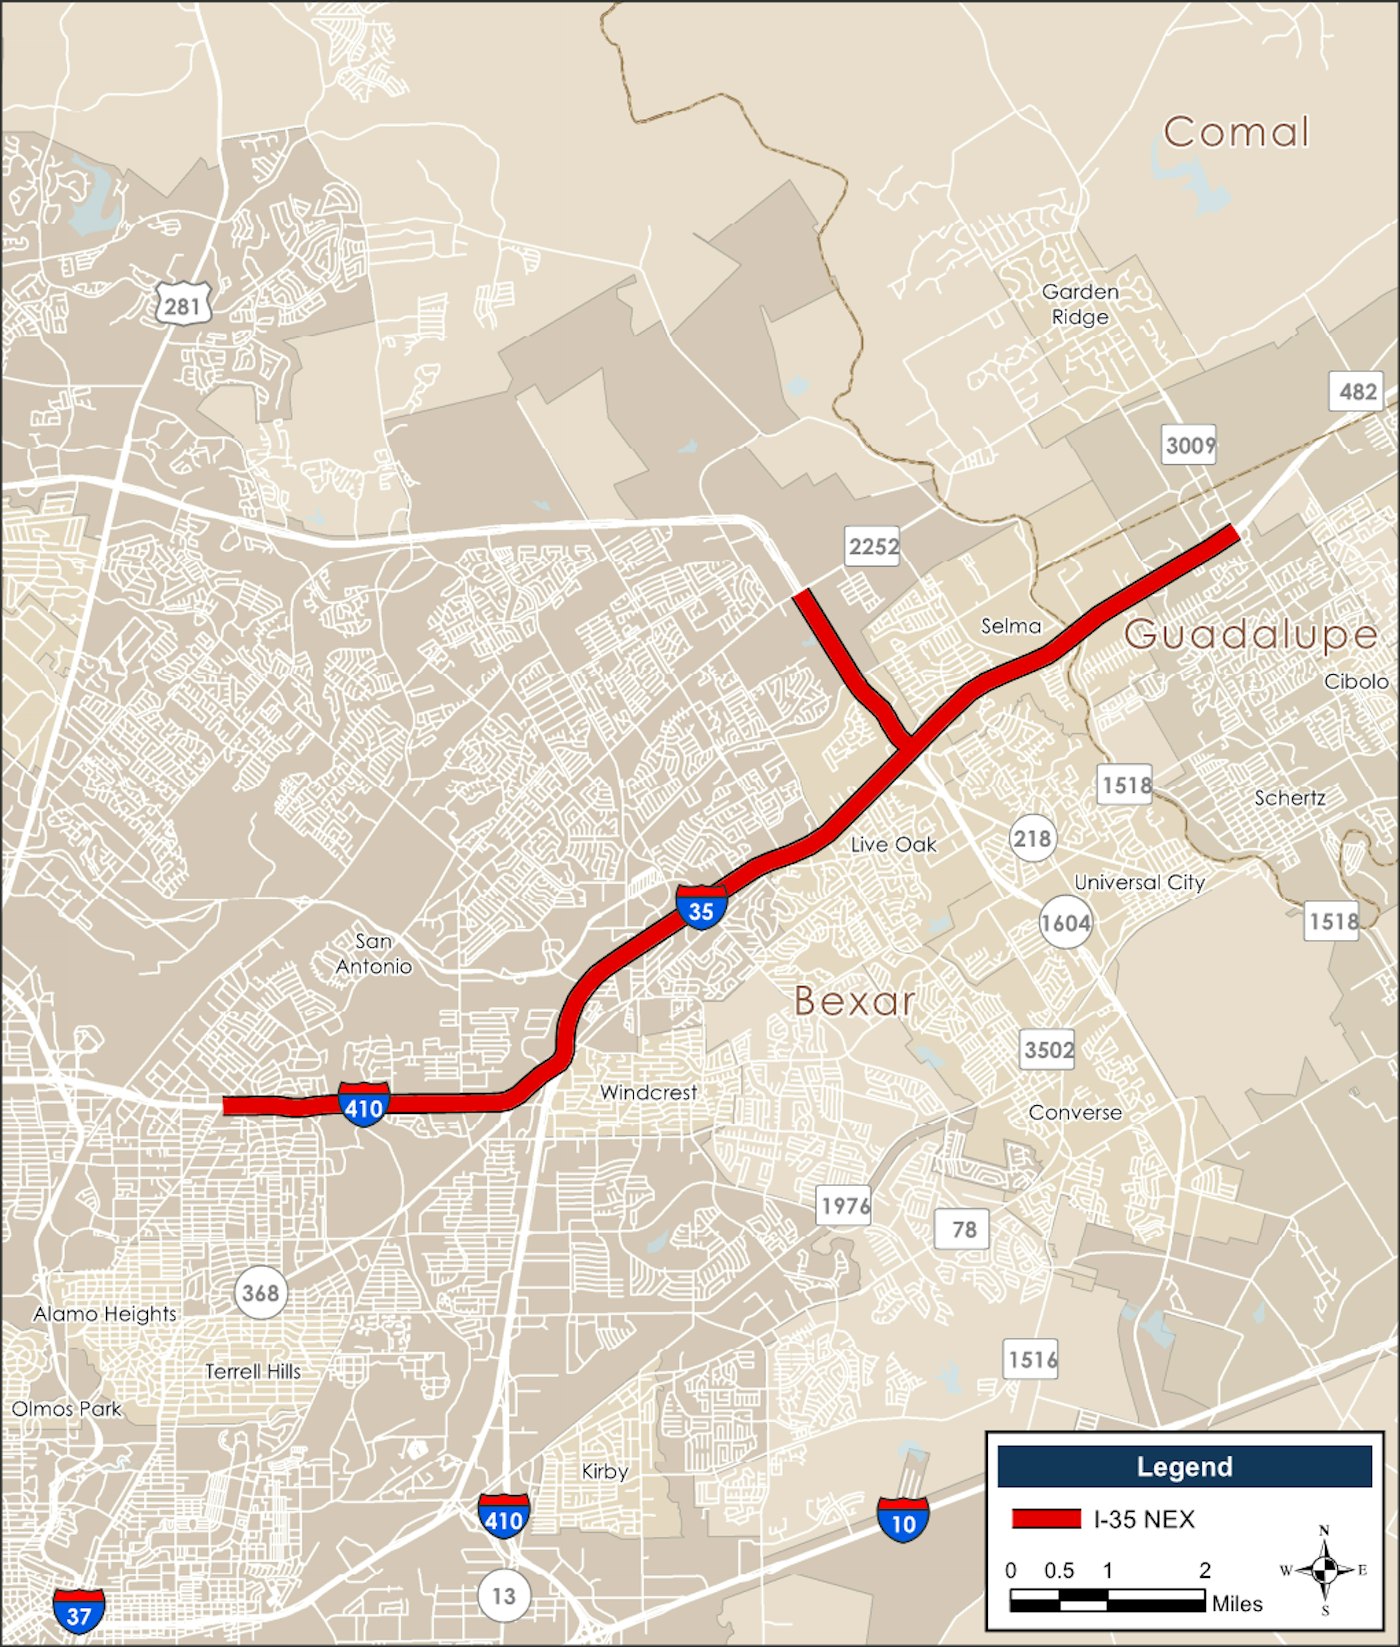 Contract awarded for $1.5B expansion of I-35 in San Antonio | Equipment